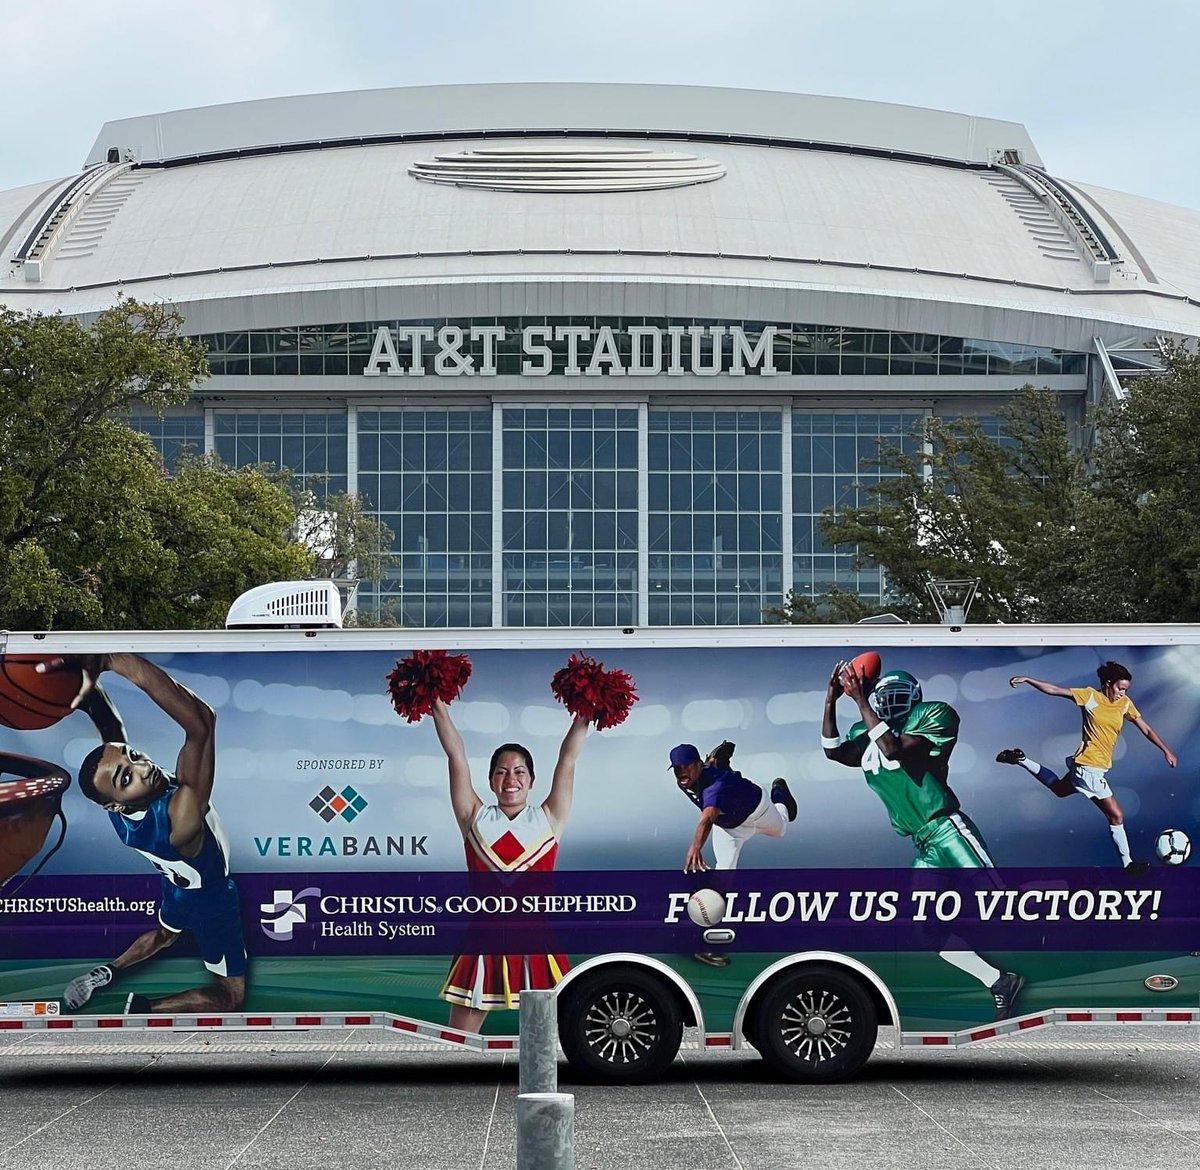 East Texas athletes are in good hands with the @CHRISTUSHealth's Mobile Athletic Training Room (MATR), a sports medical clinic on wheels stocked with equipment like our FDR AQRO digital X-ray system. Read more: brnw.ch/21wG80p via @ITNeditor #Radiology #CustomerWin